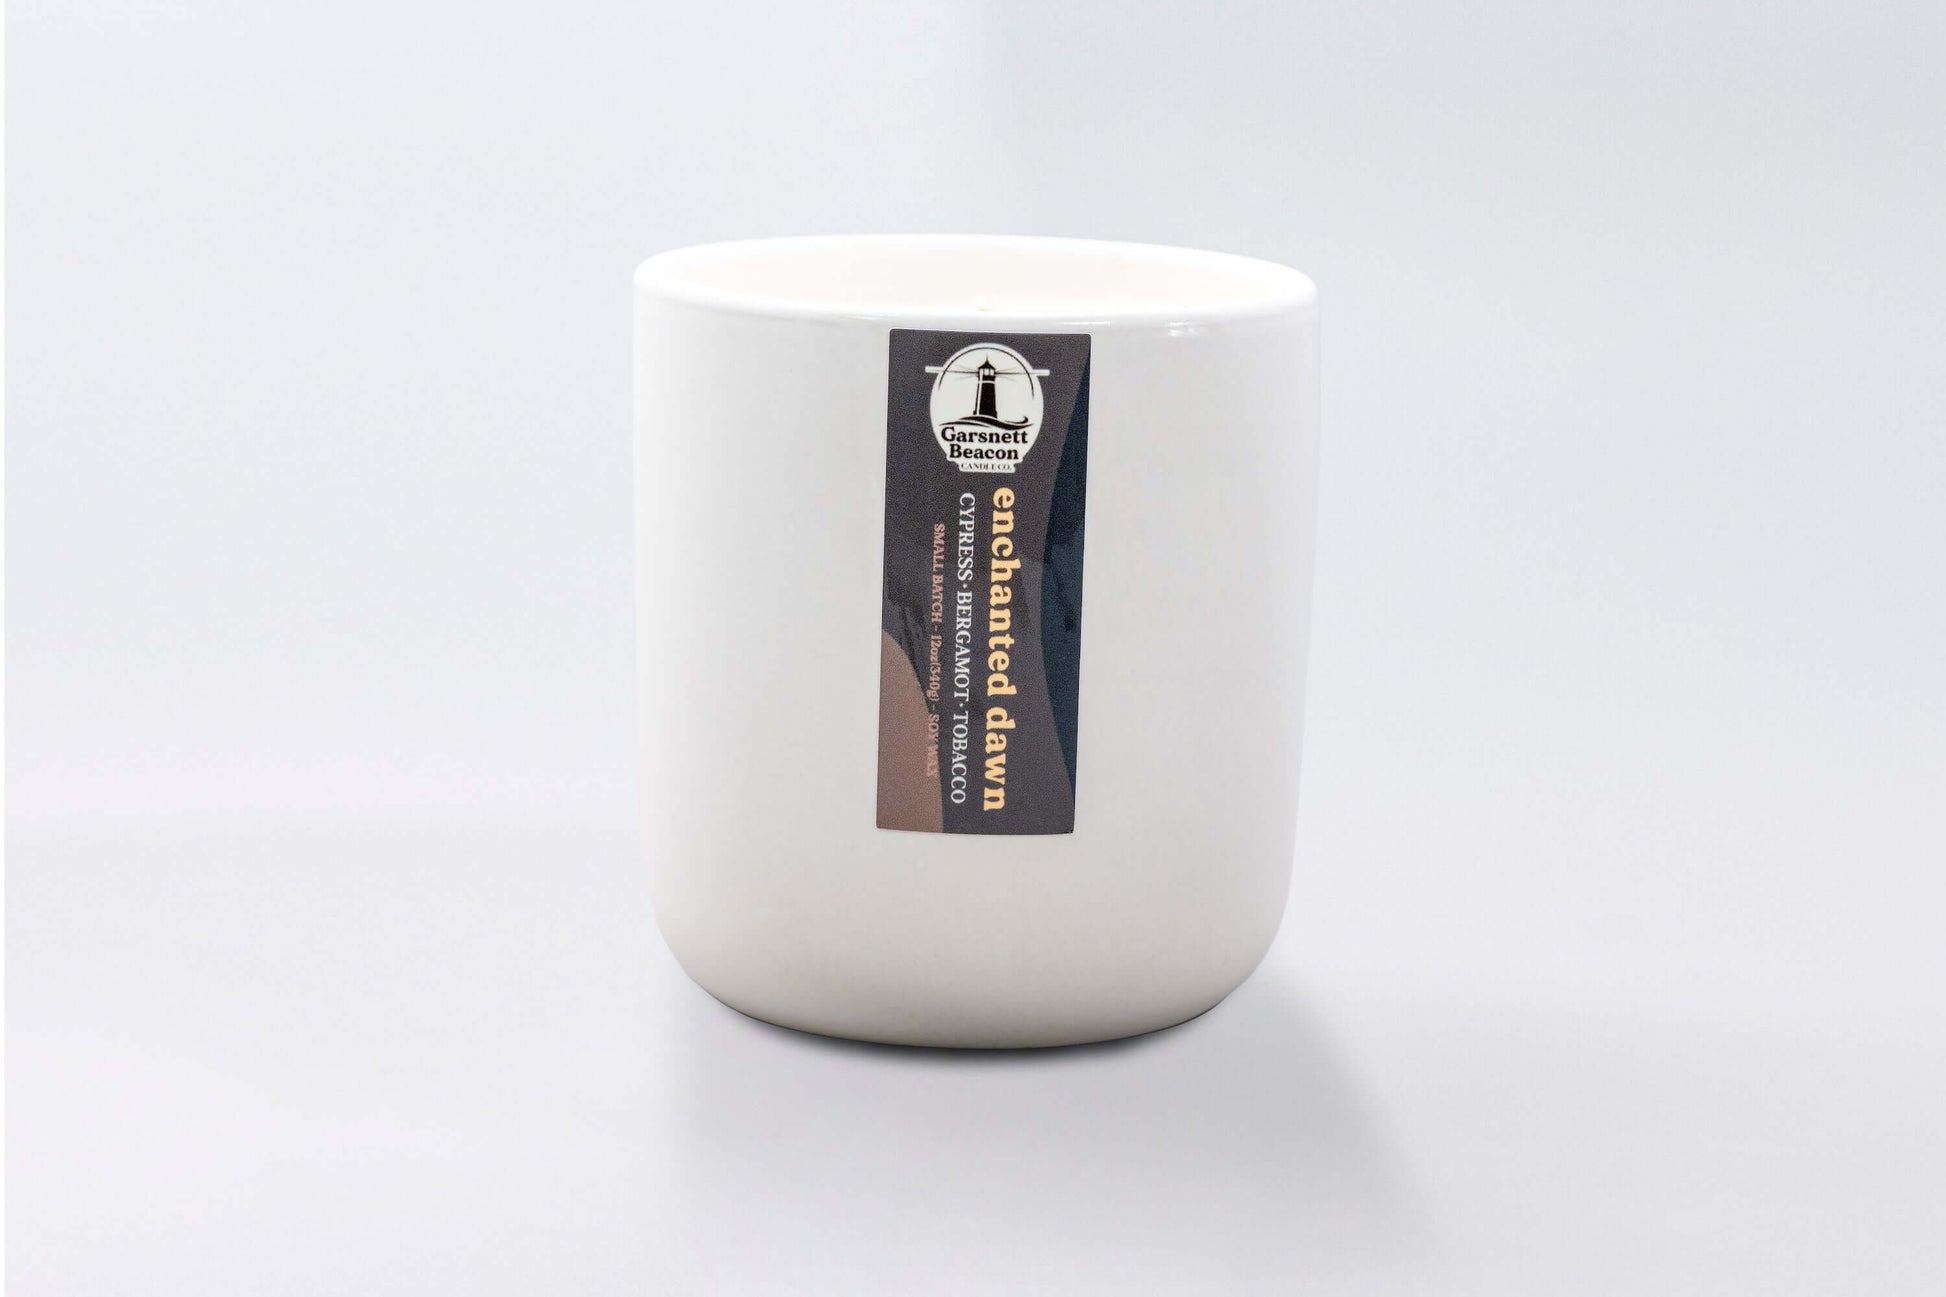 Cypress Bergamot Saffron Flower Patchoili scented candles called Enchanted Dawn in glass ceramic tin and wax melts